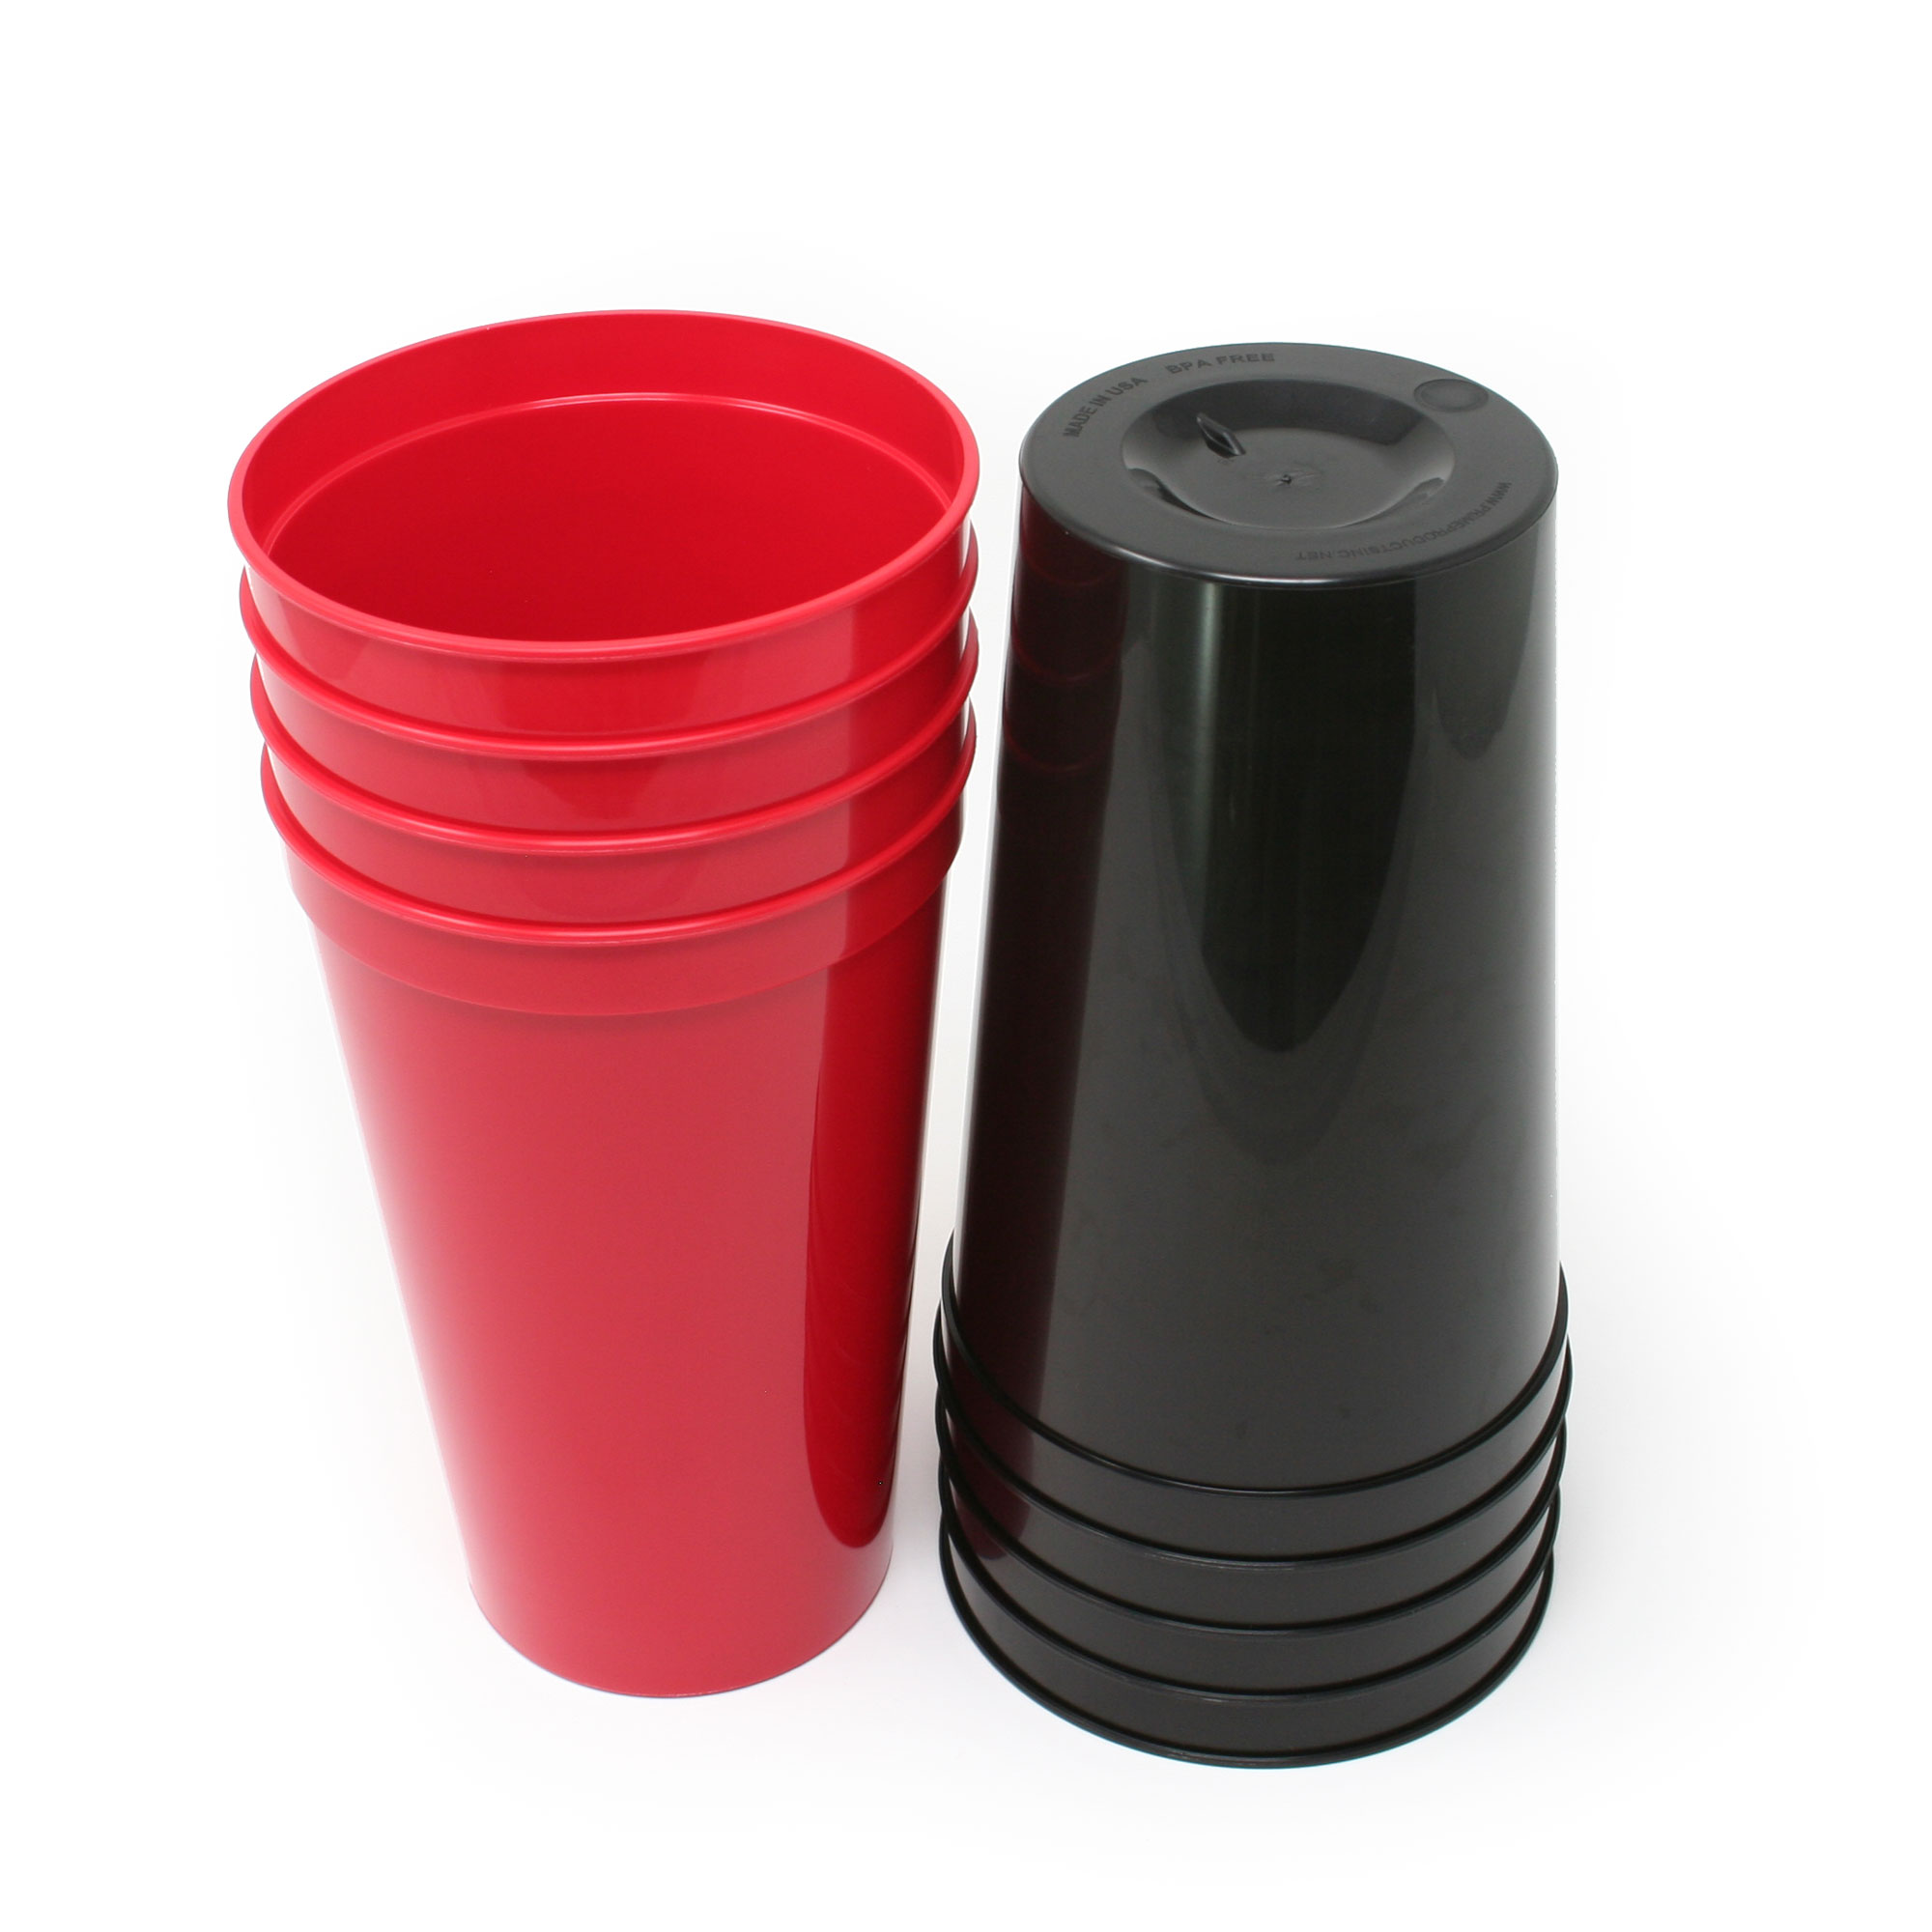 CSBD Stadium 22 oz. Plastic Cups, 10 Pack, Blank Reusable Drink Tumblers  for Parties, Events, Market…See more CSBD Stadium 22 oz. Plastic Cups, 10